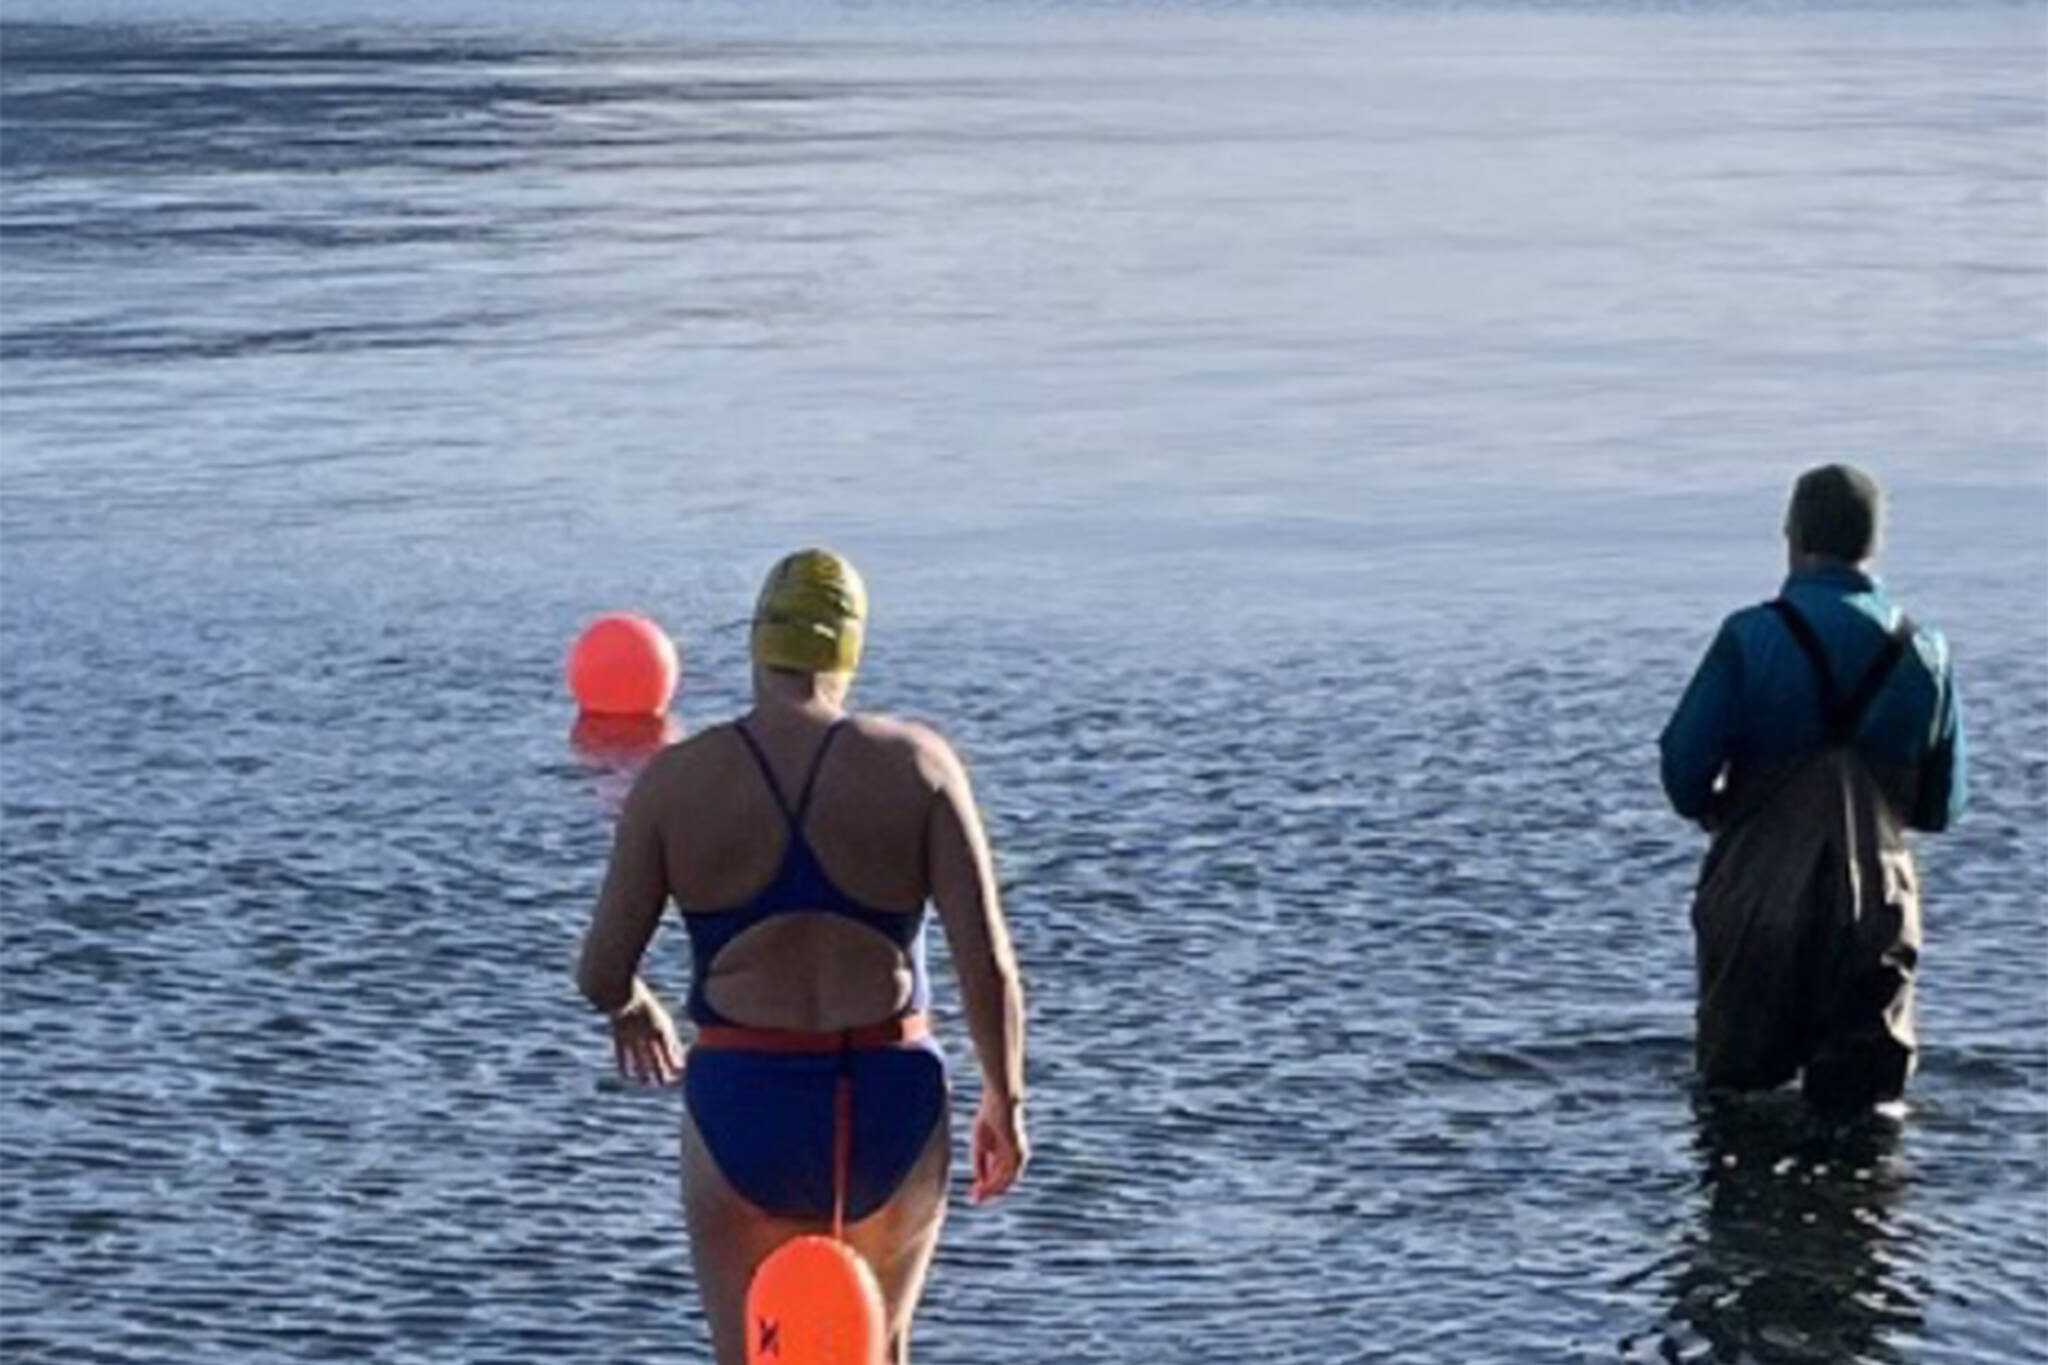 Cheryl Fellman enters the chilly waters of Auke Bay. Freeman is on the verge of becoming one of only 43 Americans — and 422 people worldwide — to swim an official Ice Mile. (Courtesy photo/Cheryl Fellman)